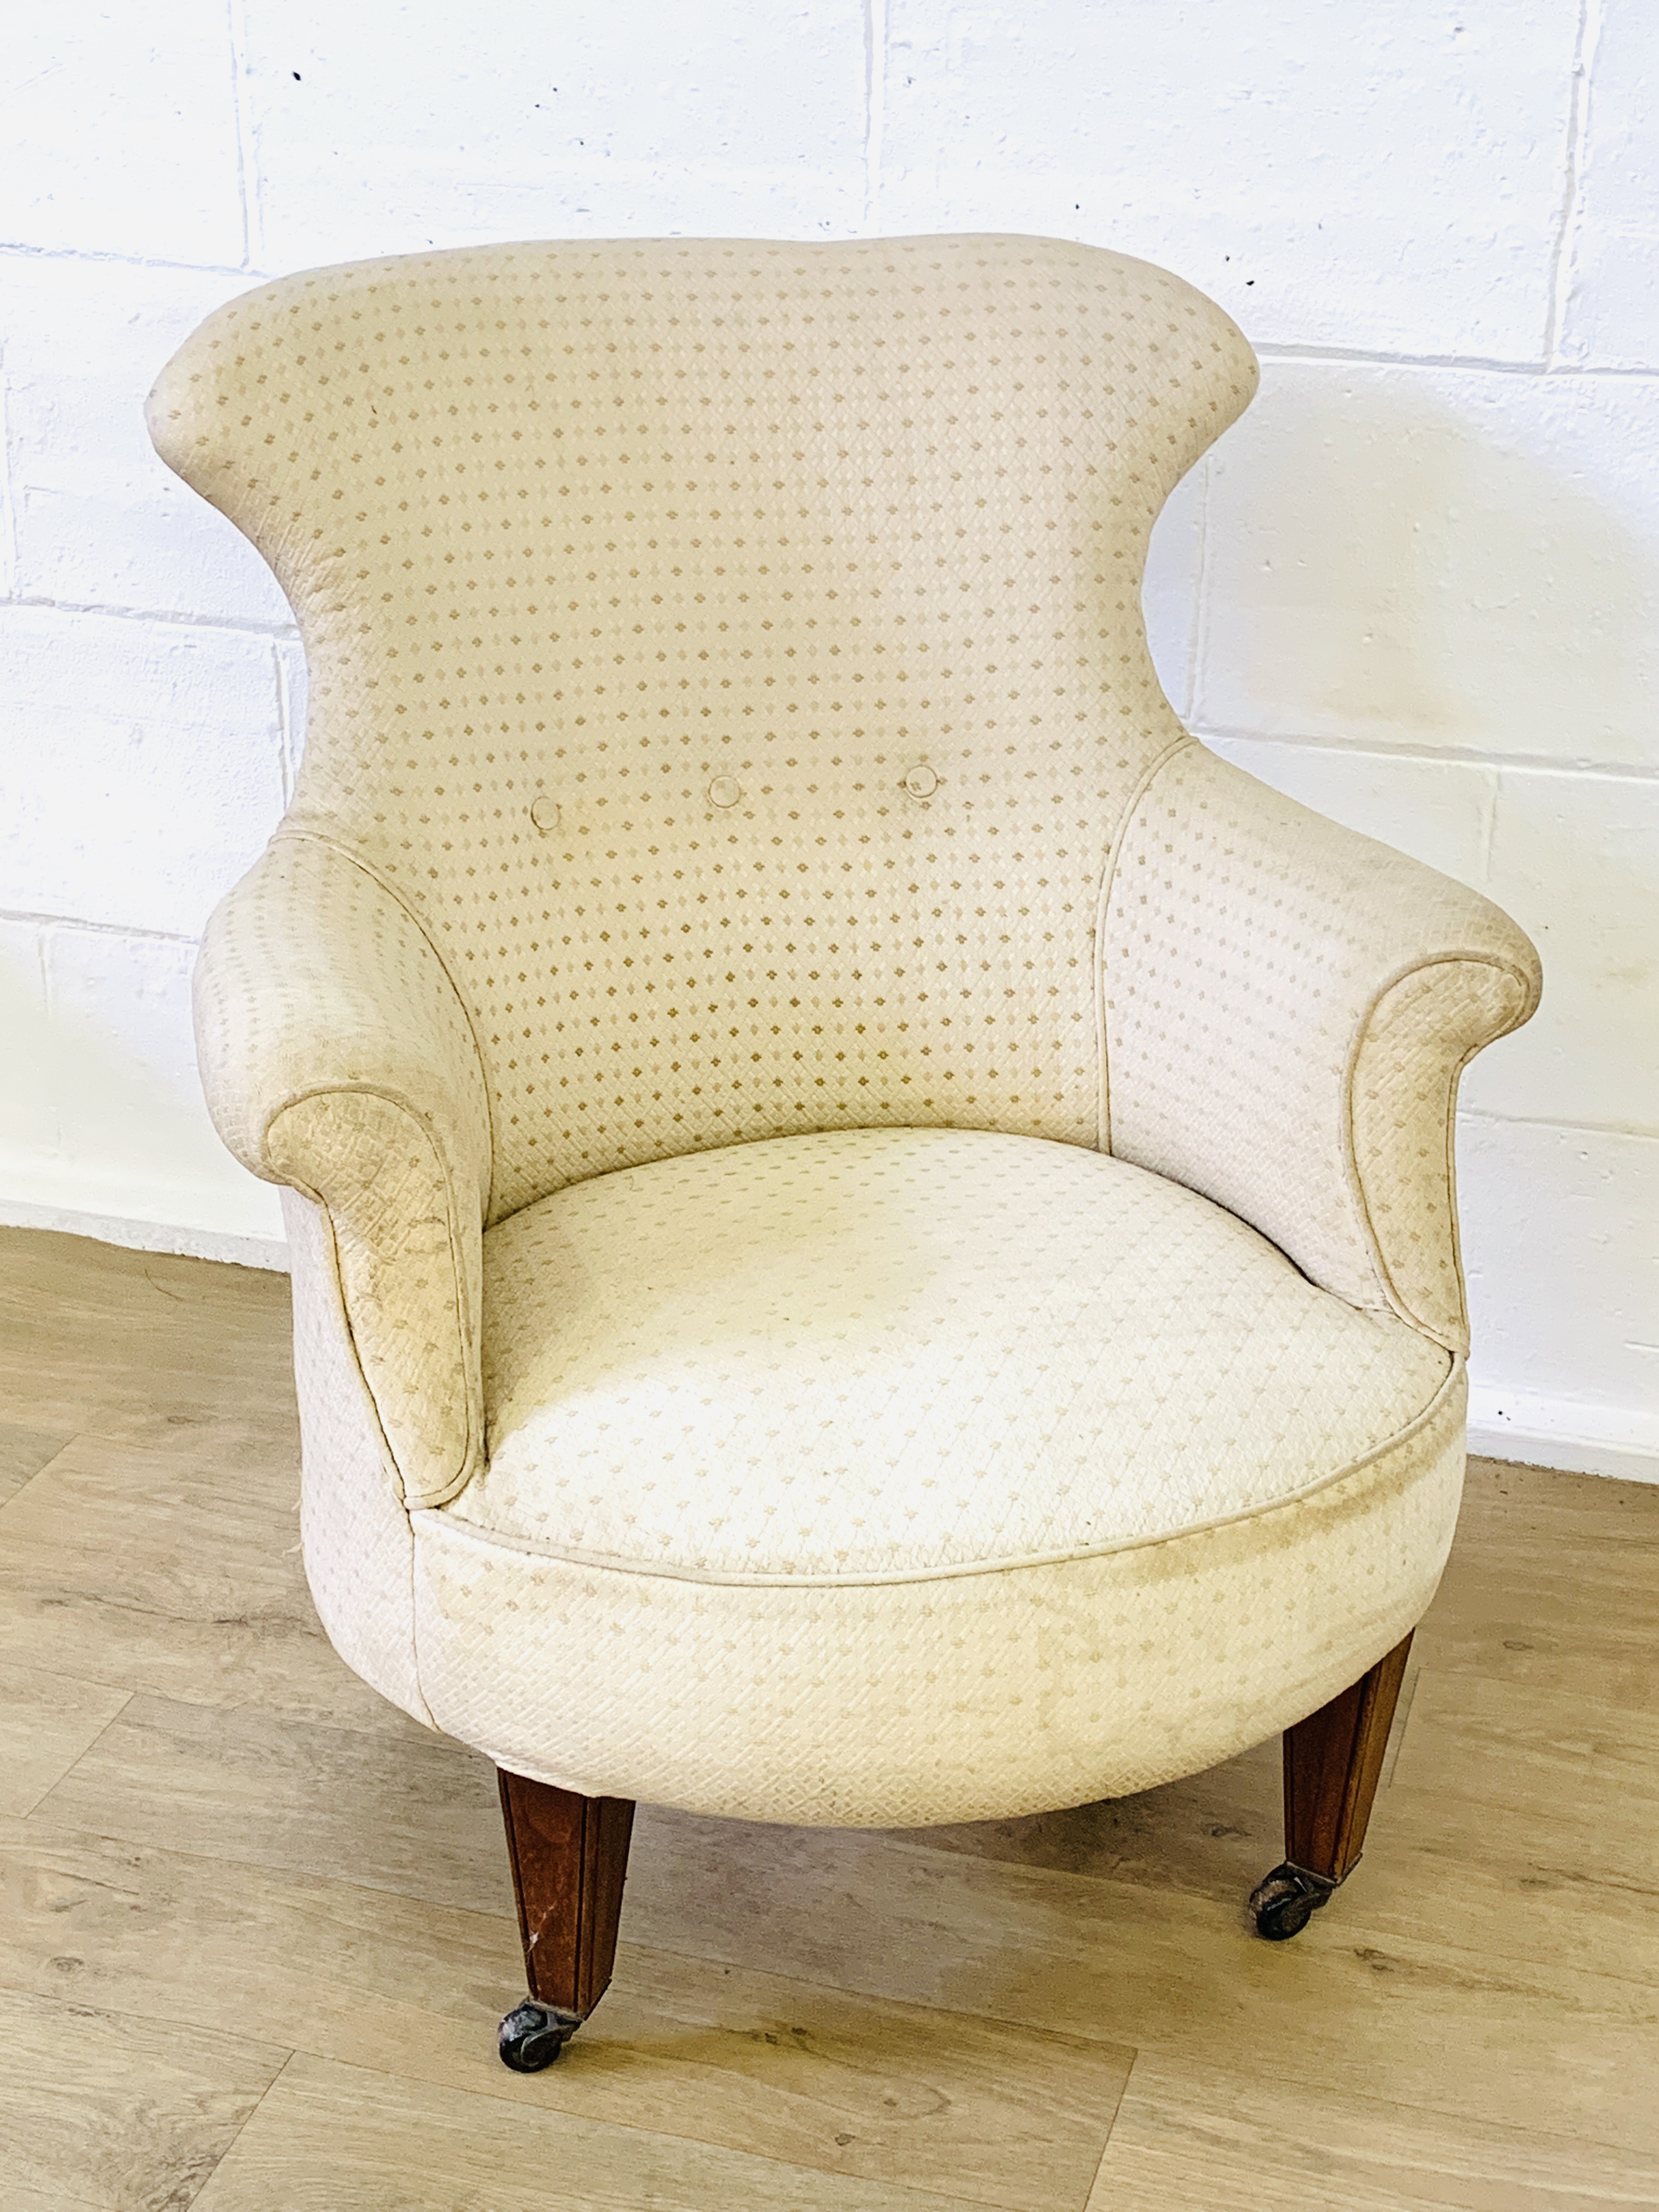 Cream upholstered button back bedroom armchair - Image 3 of 4